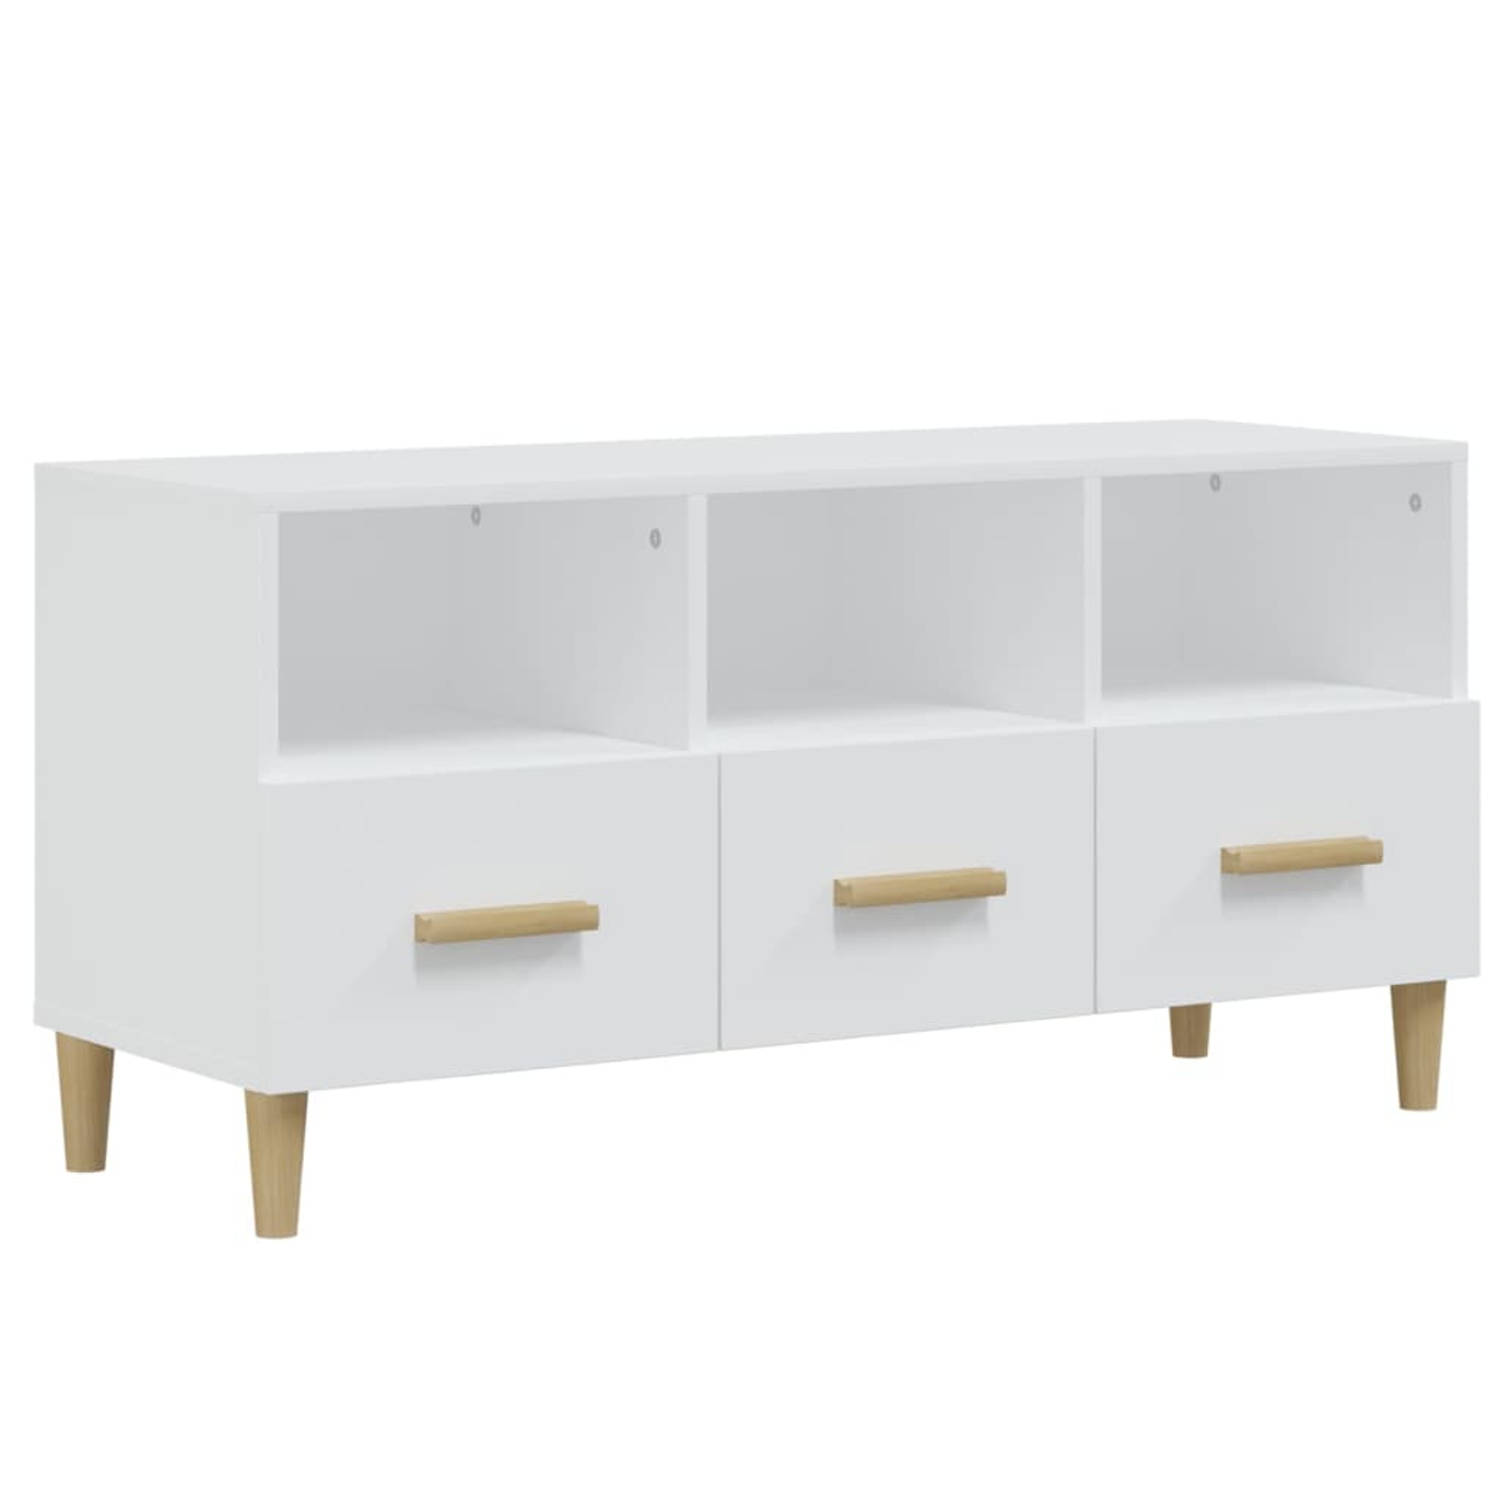 The Living Store TV-meubel - Modern Hout - 102 x 36 x 50 cm - Hoogglans wit